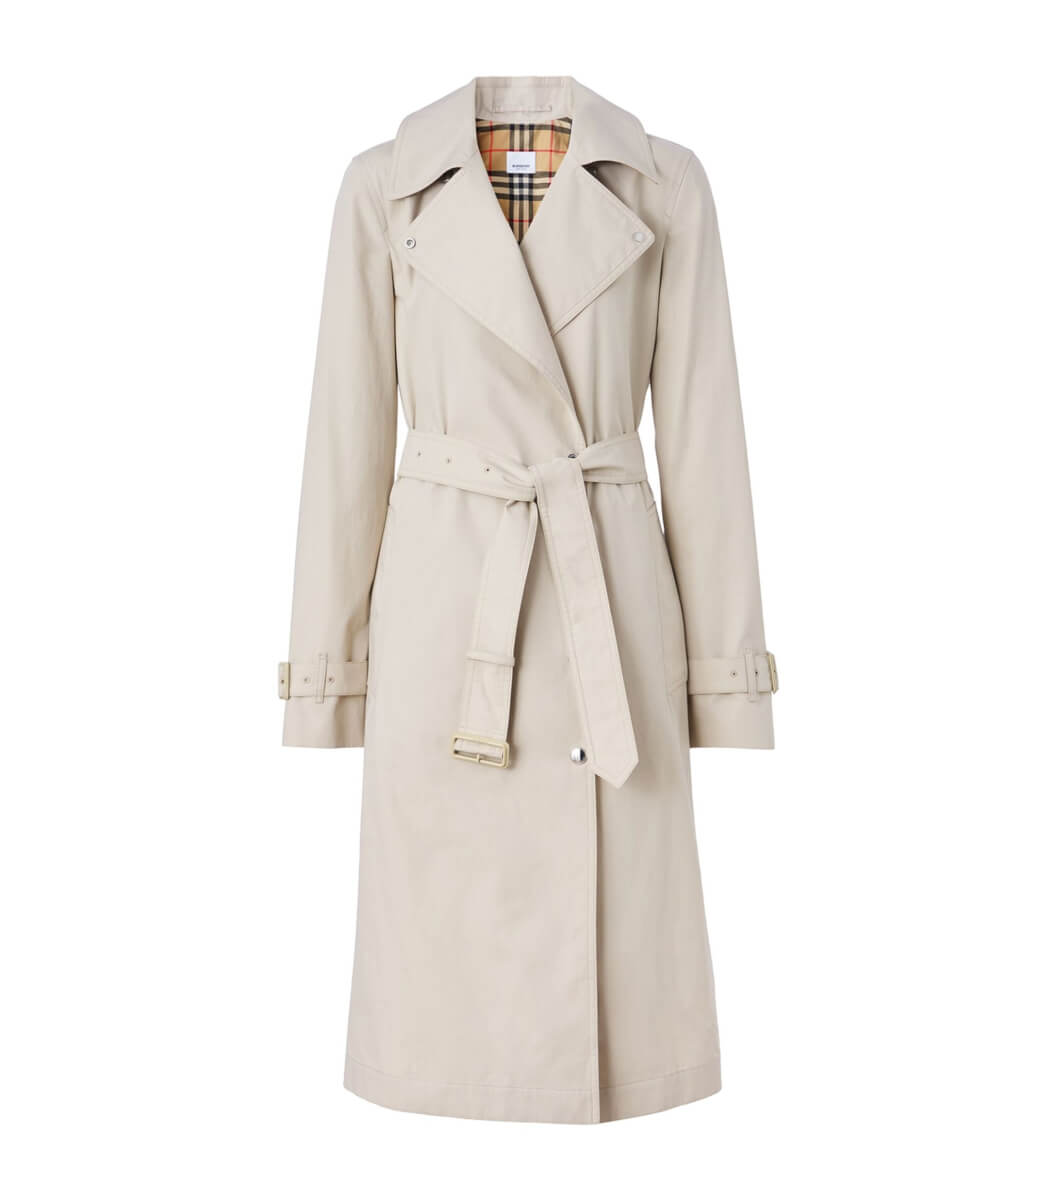 HARRODS BURBERRY Cotton Belted Trench Coat £1,790